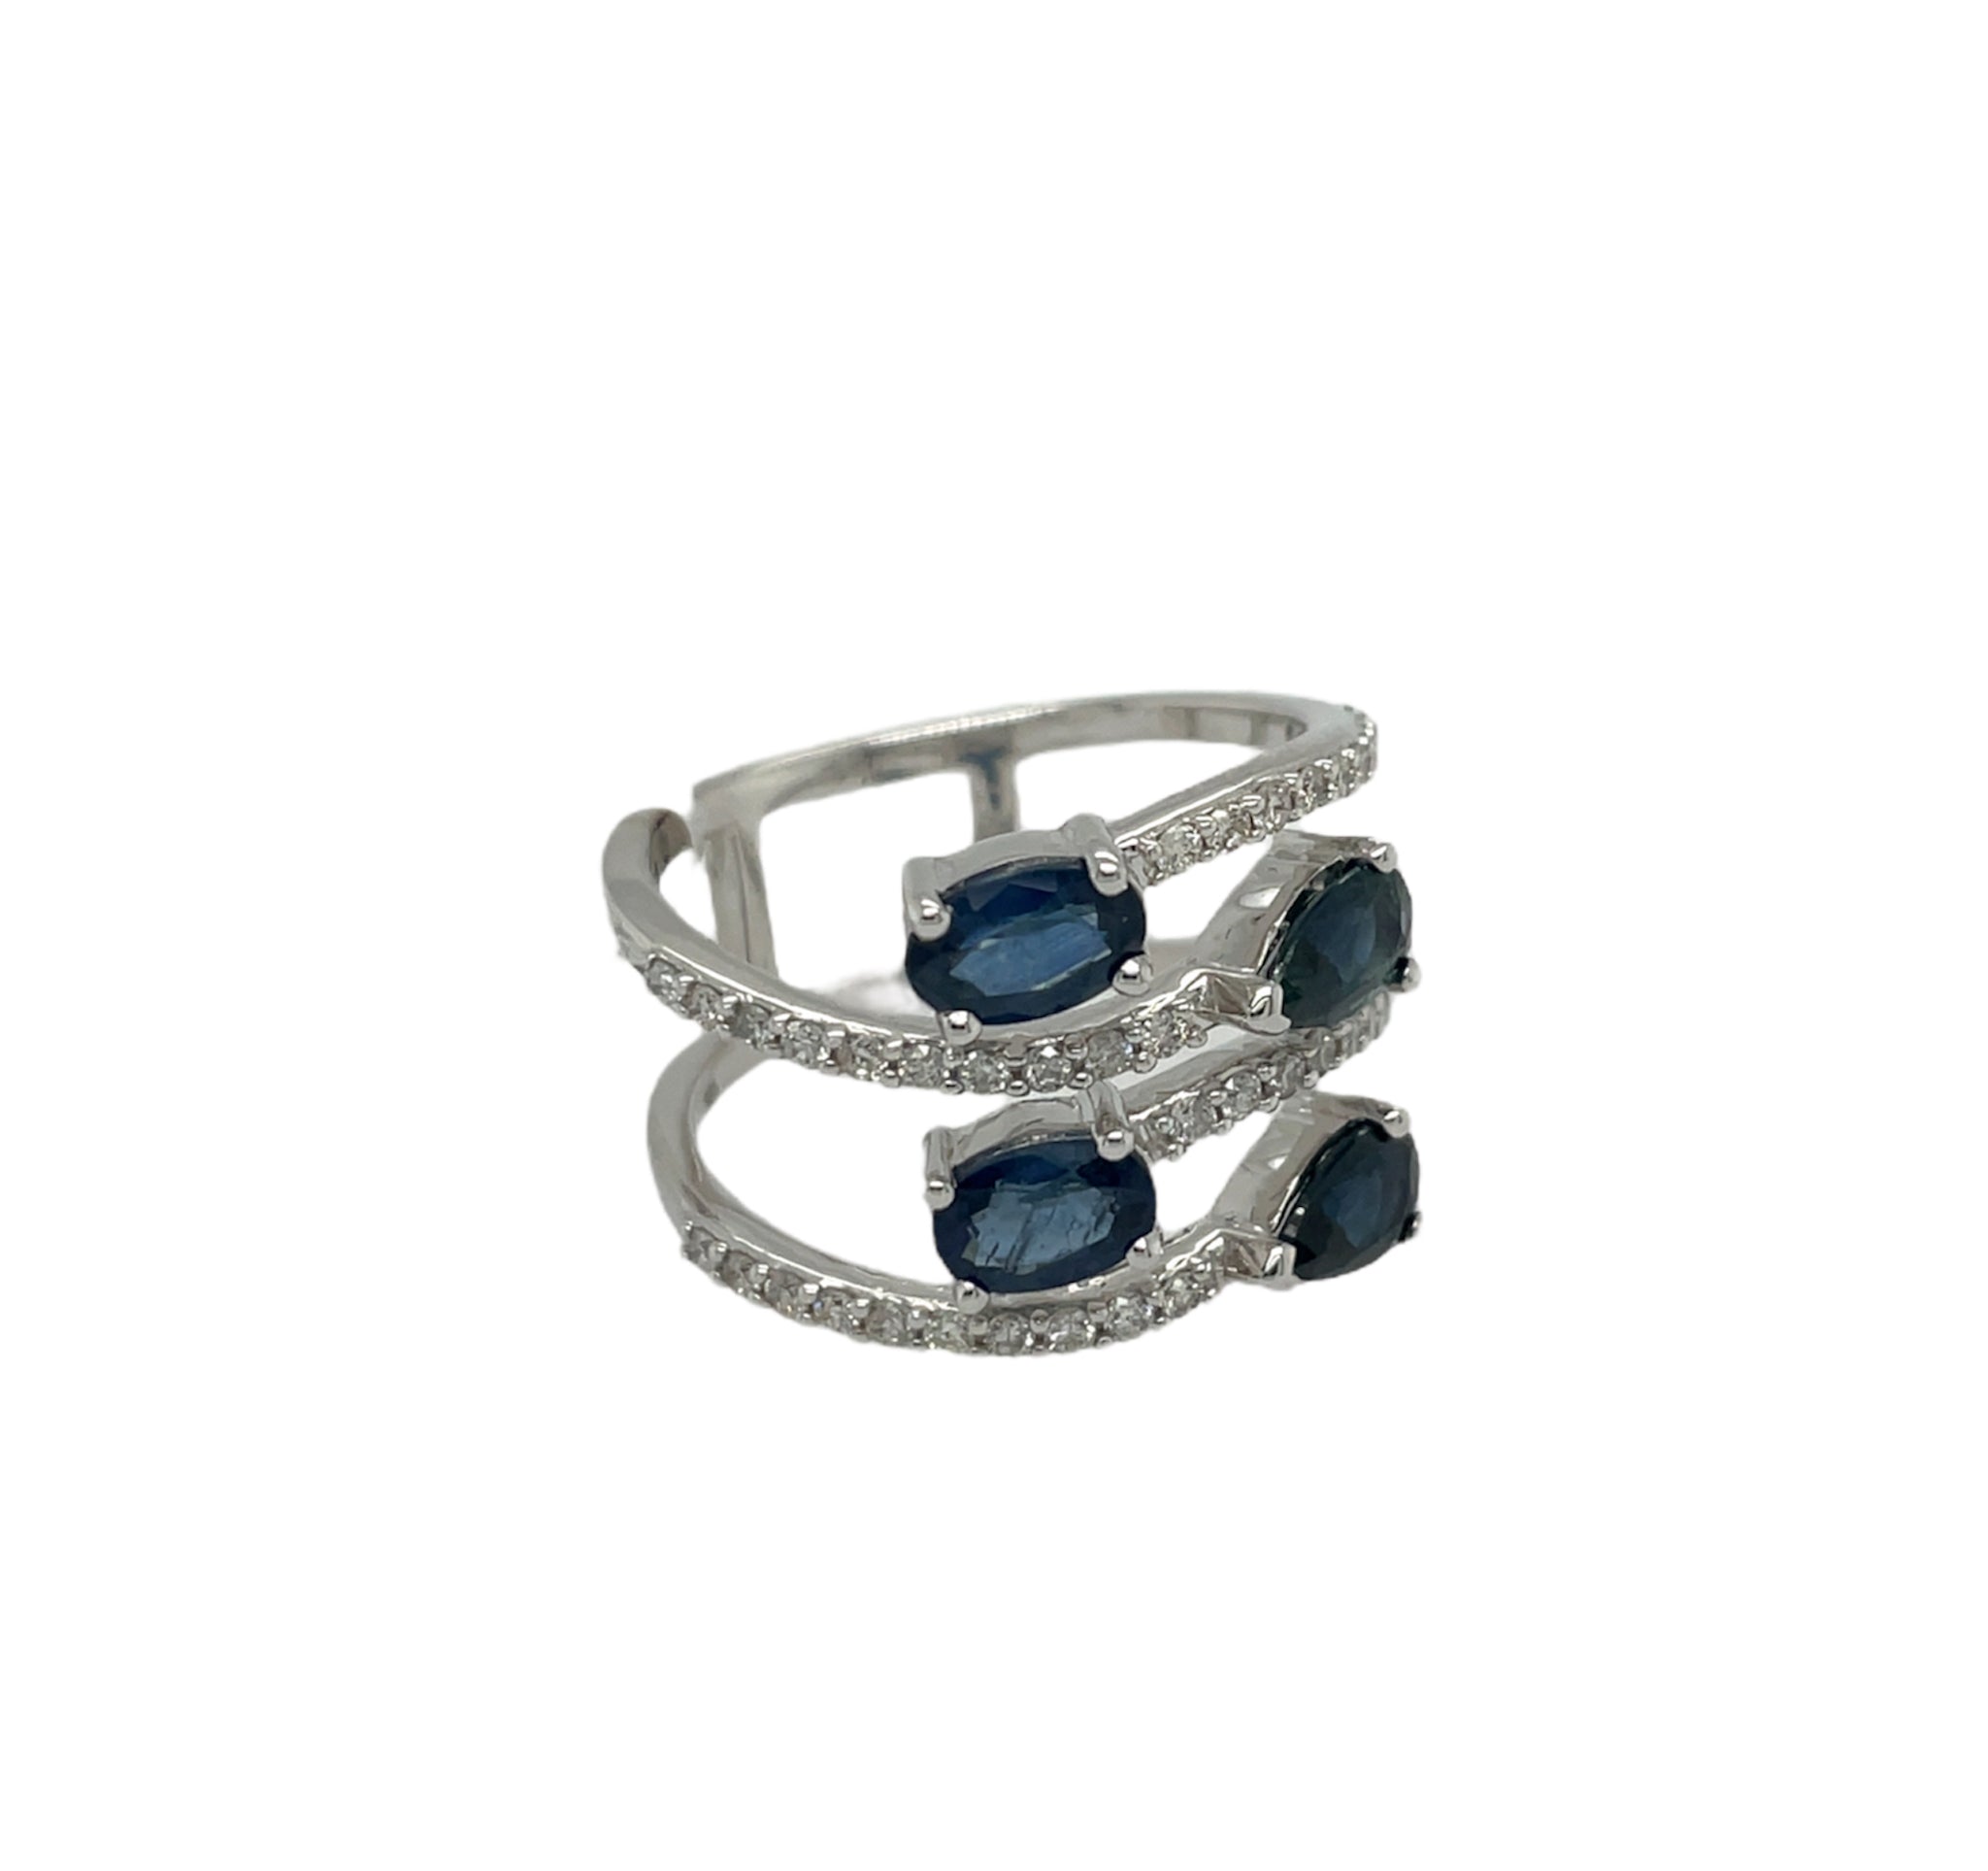 Diamond and Sapphire Cocktail Ring White Gold